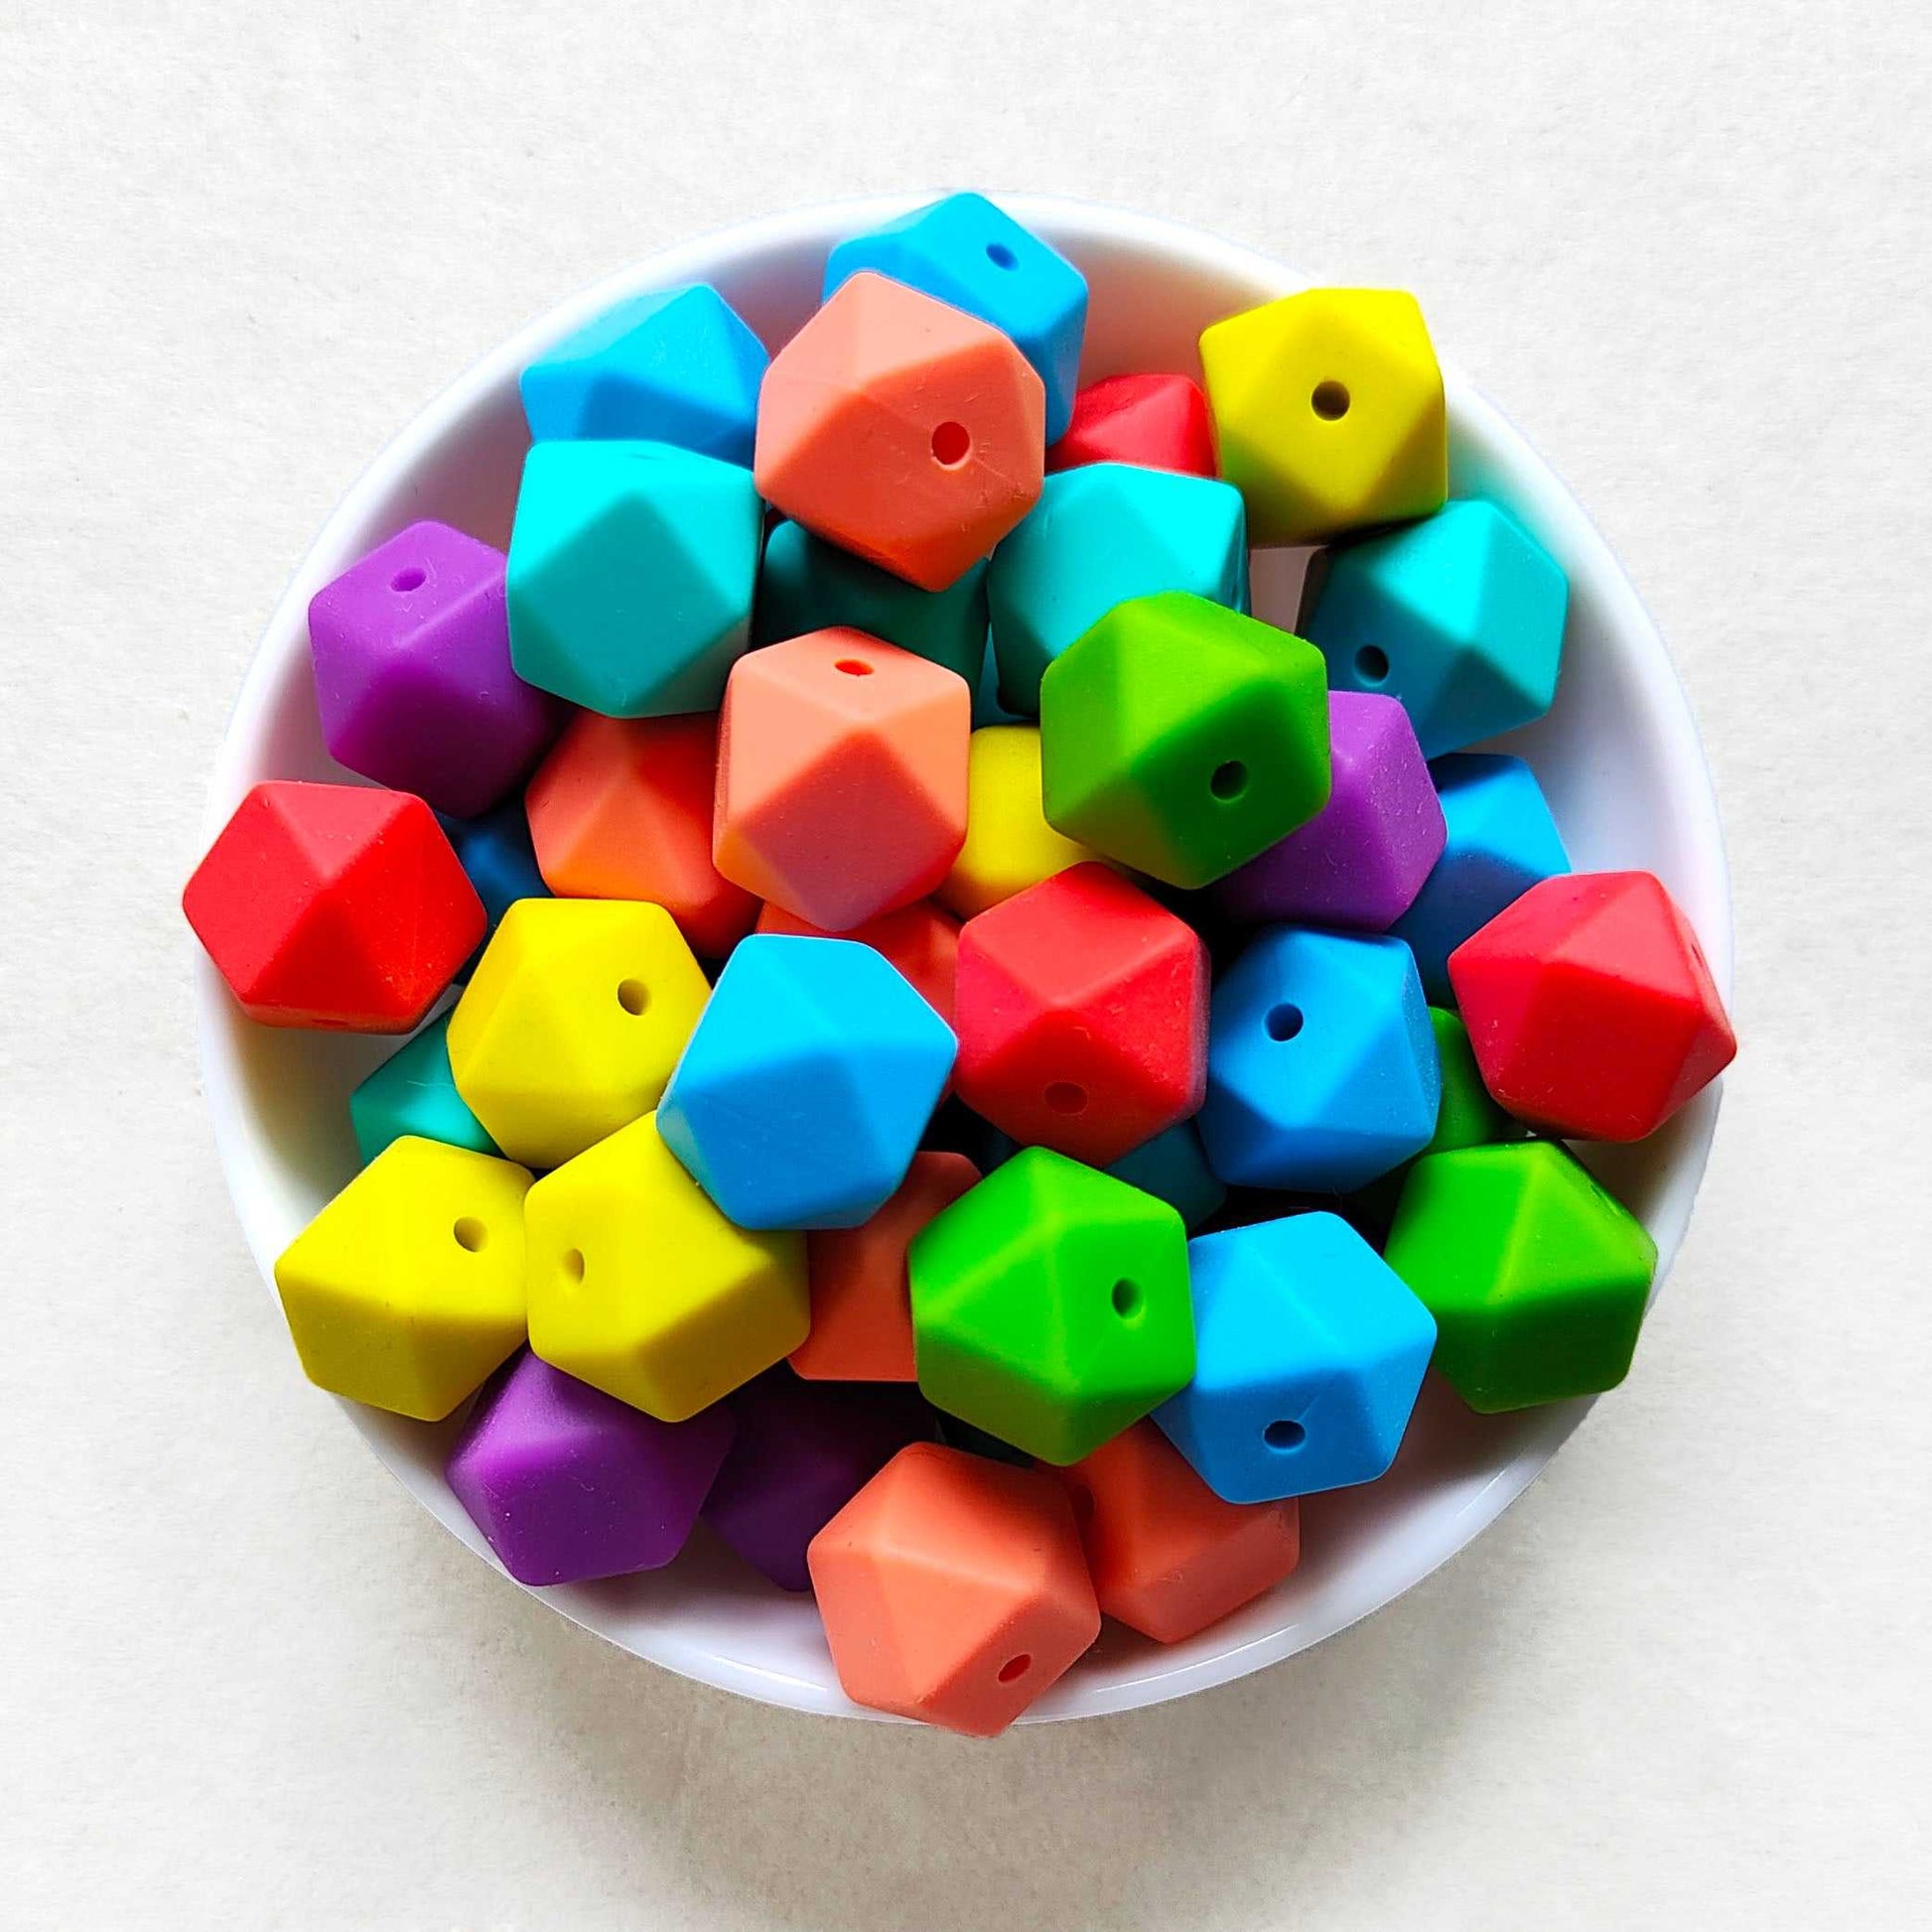 14mm Mix 7 Colors Hexagon Silicone Beads